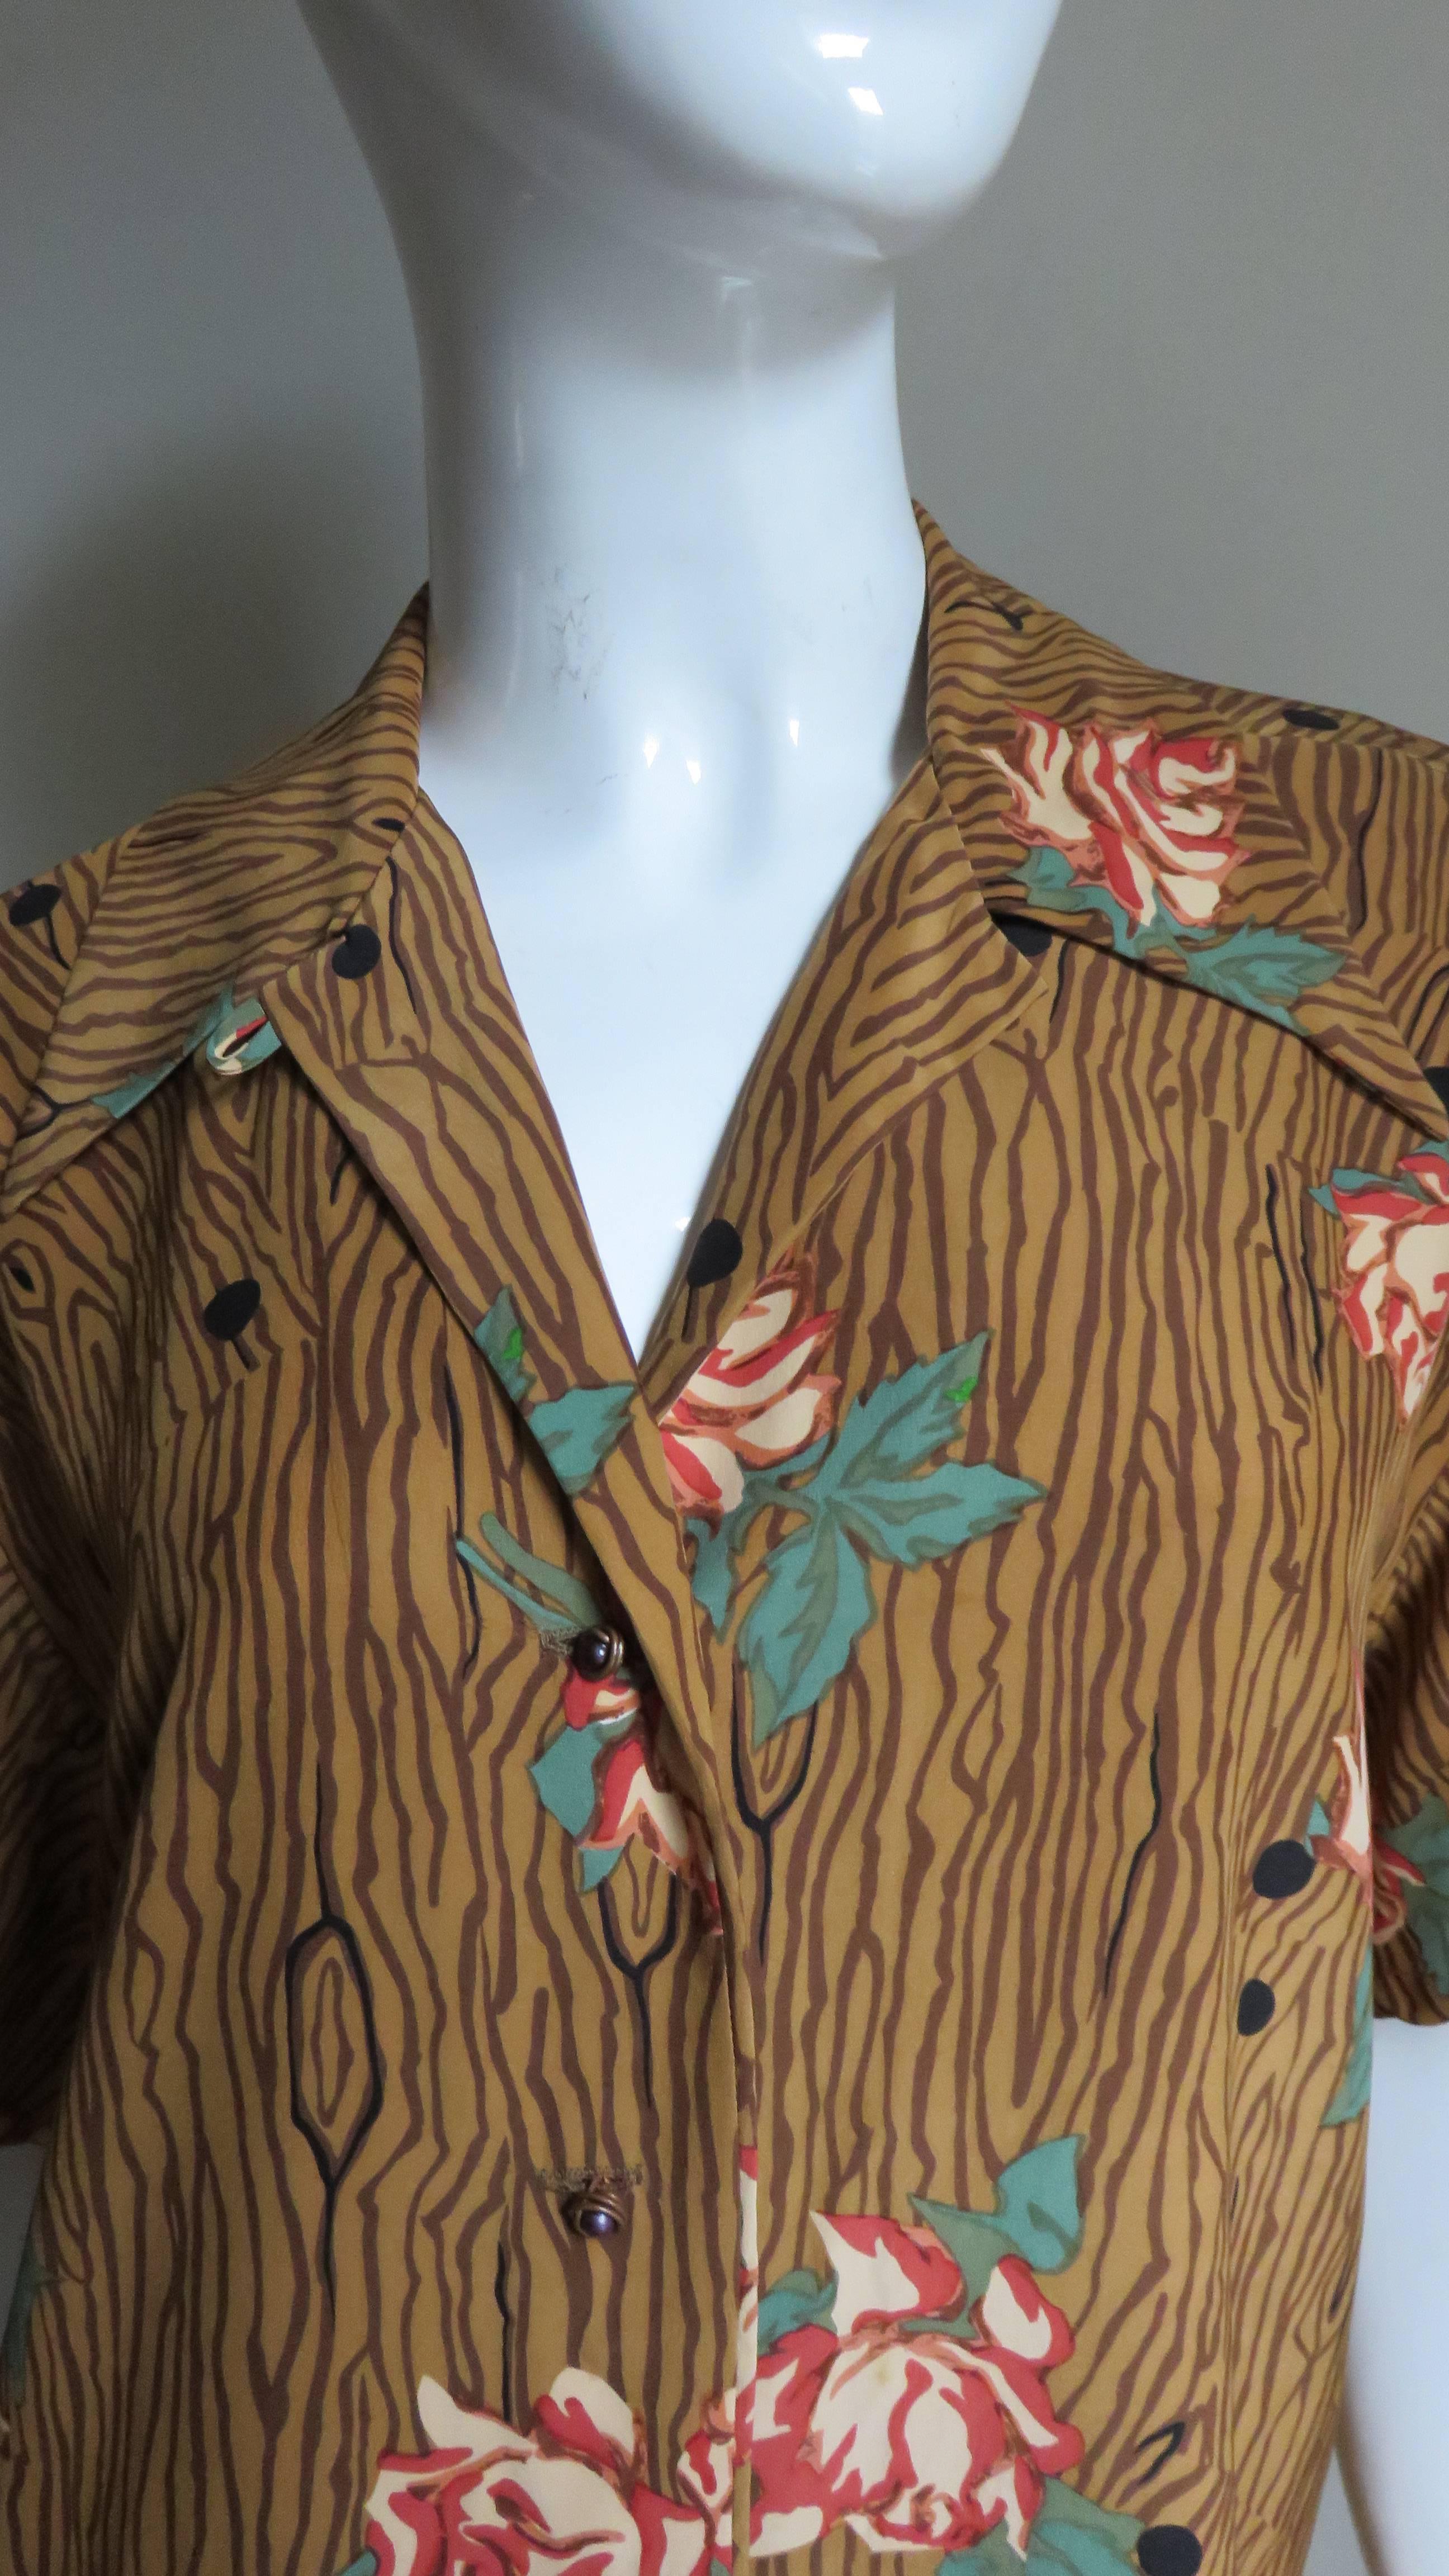 A great silk shirt from Todd Oldham.  It has short sleeves and a shirt collar with copper coiled buttons up the front.  The colors and patterns are signature Todd Oldham consisting of a faux wood grain background with a smattering of orange roses